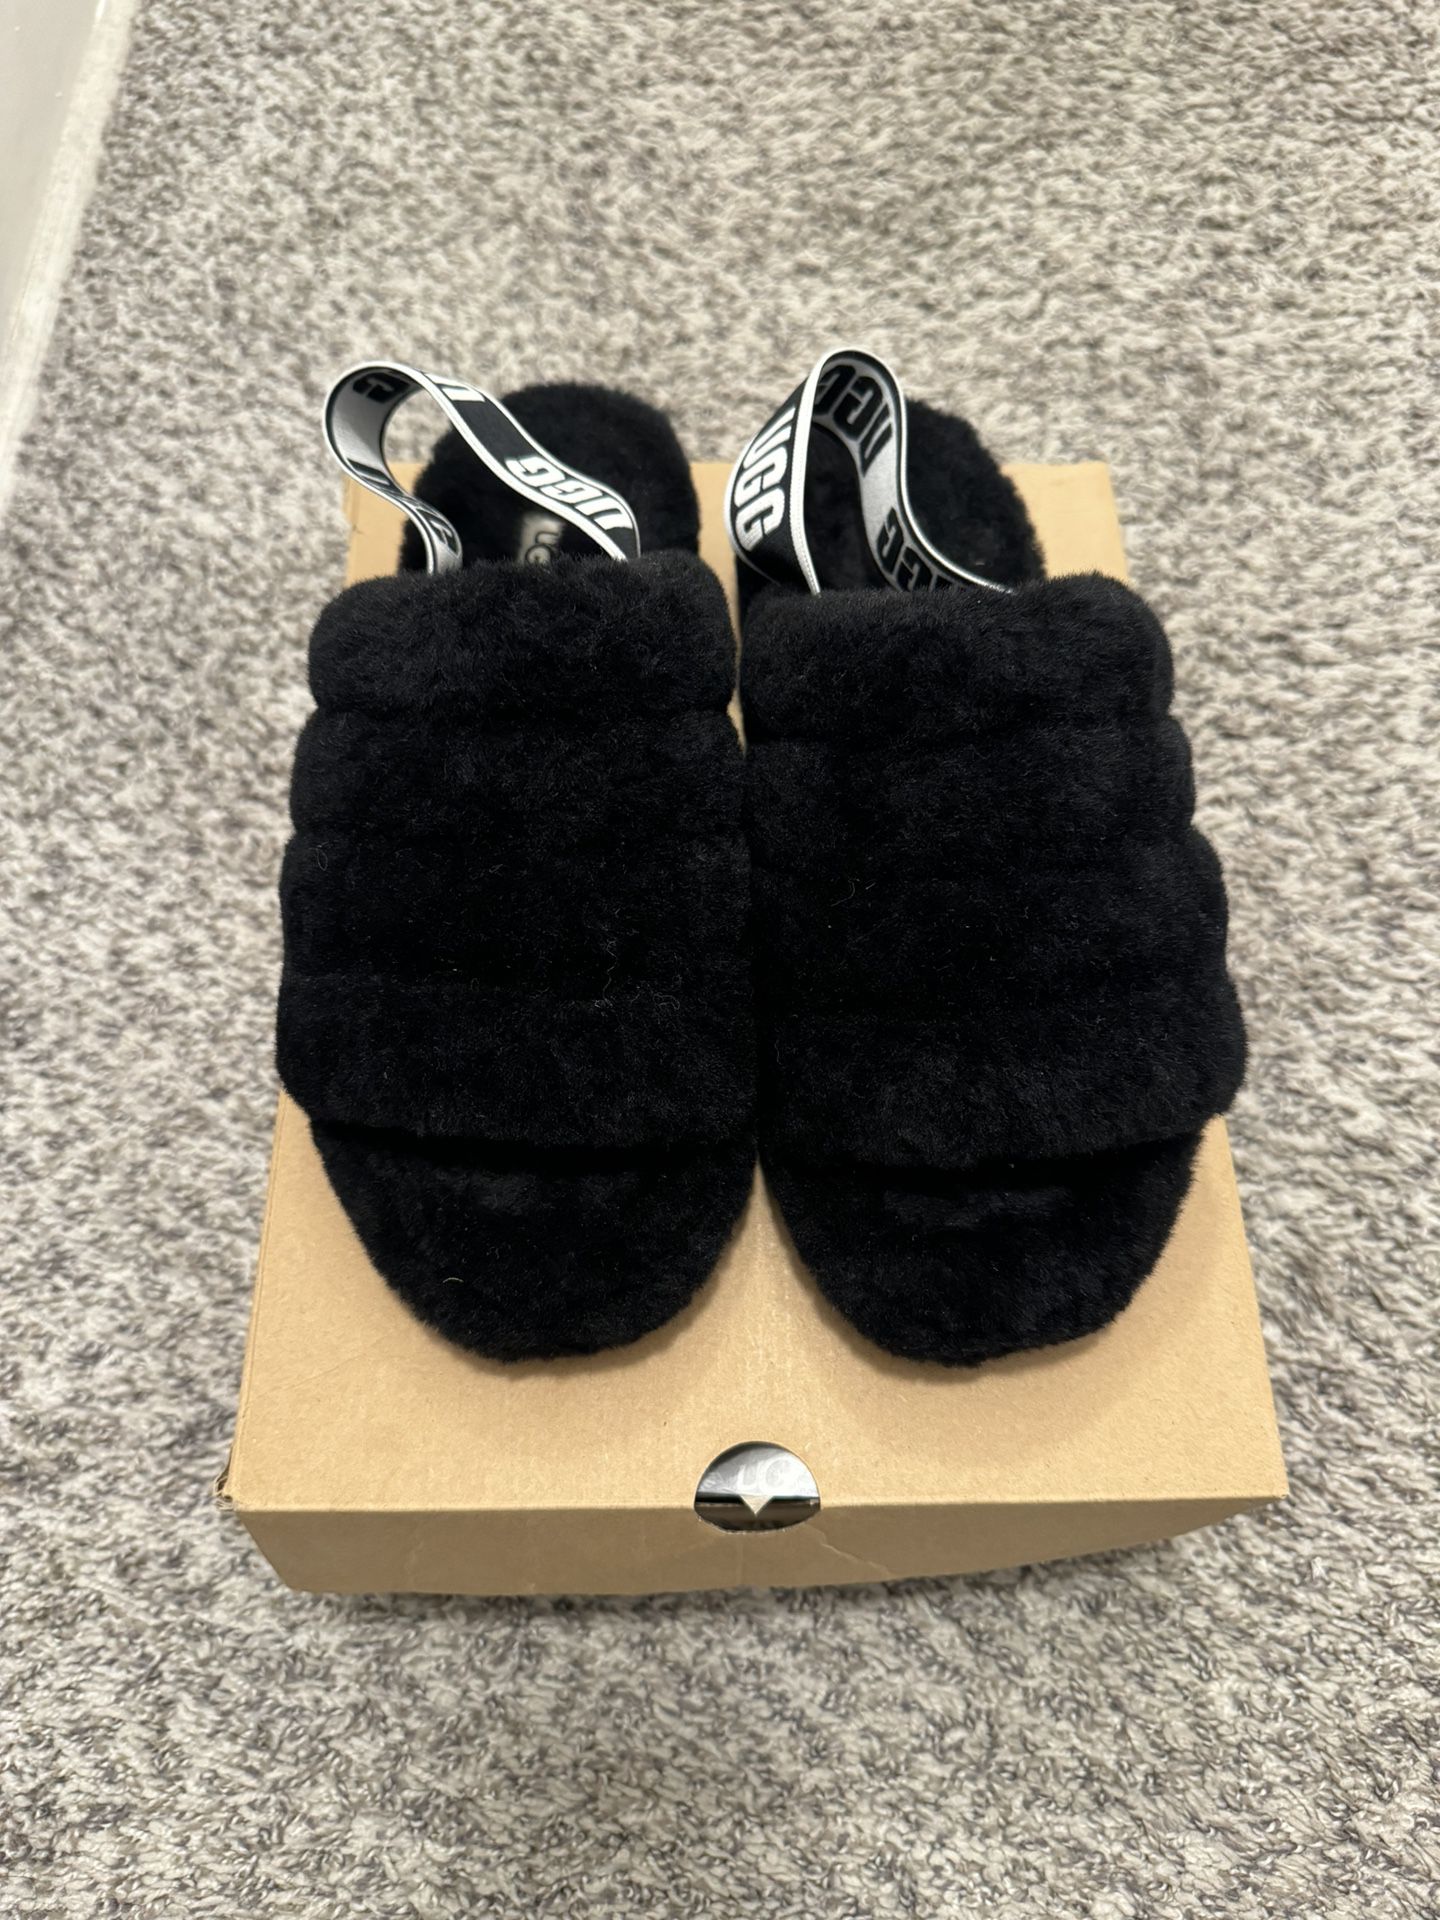 Ugg Slippers Size 9